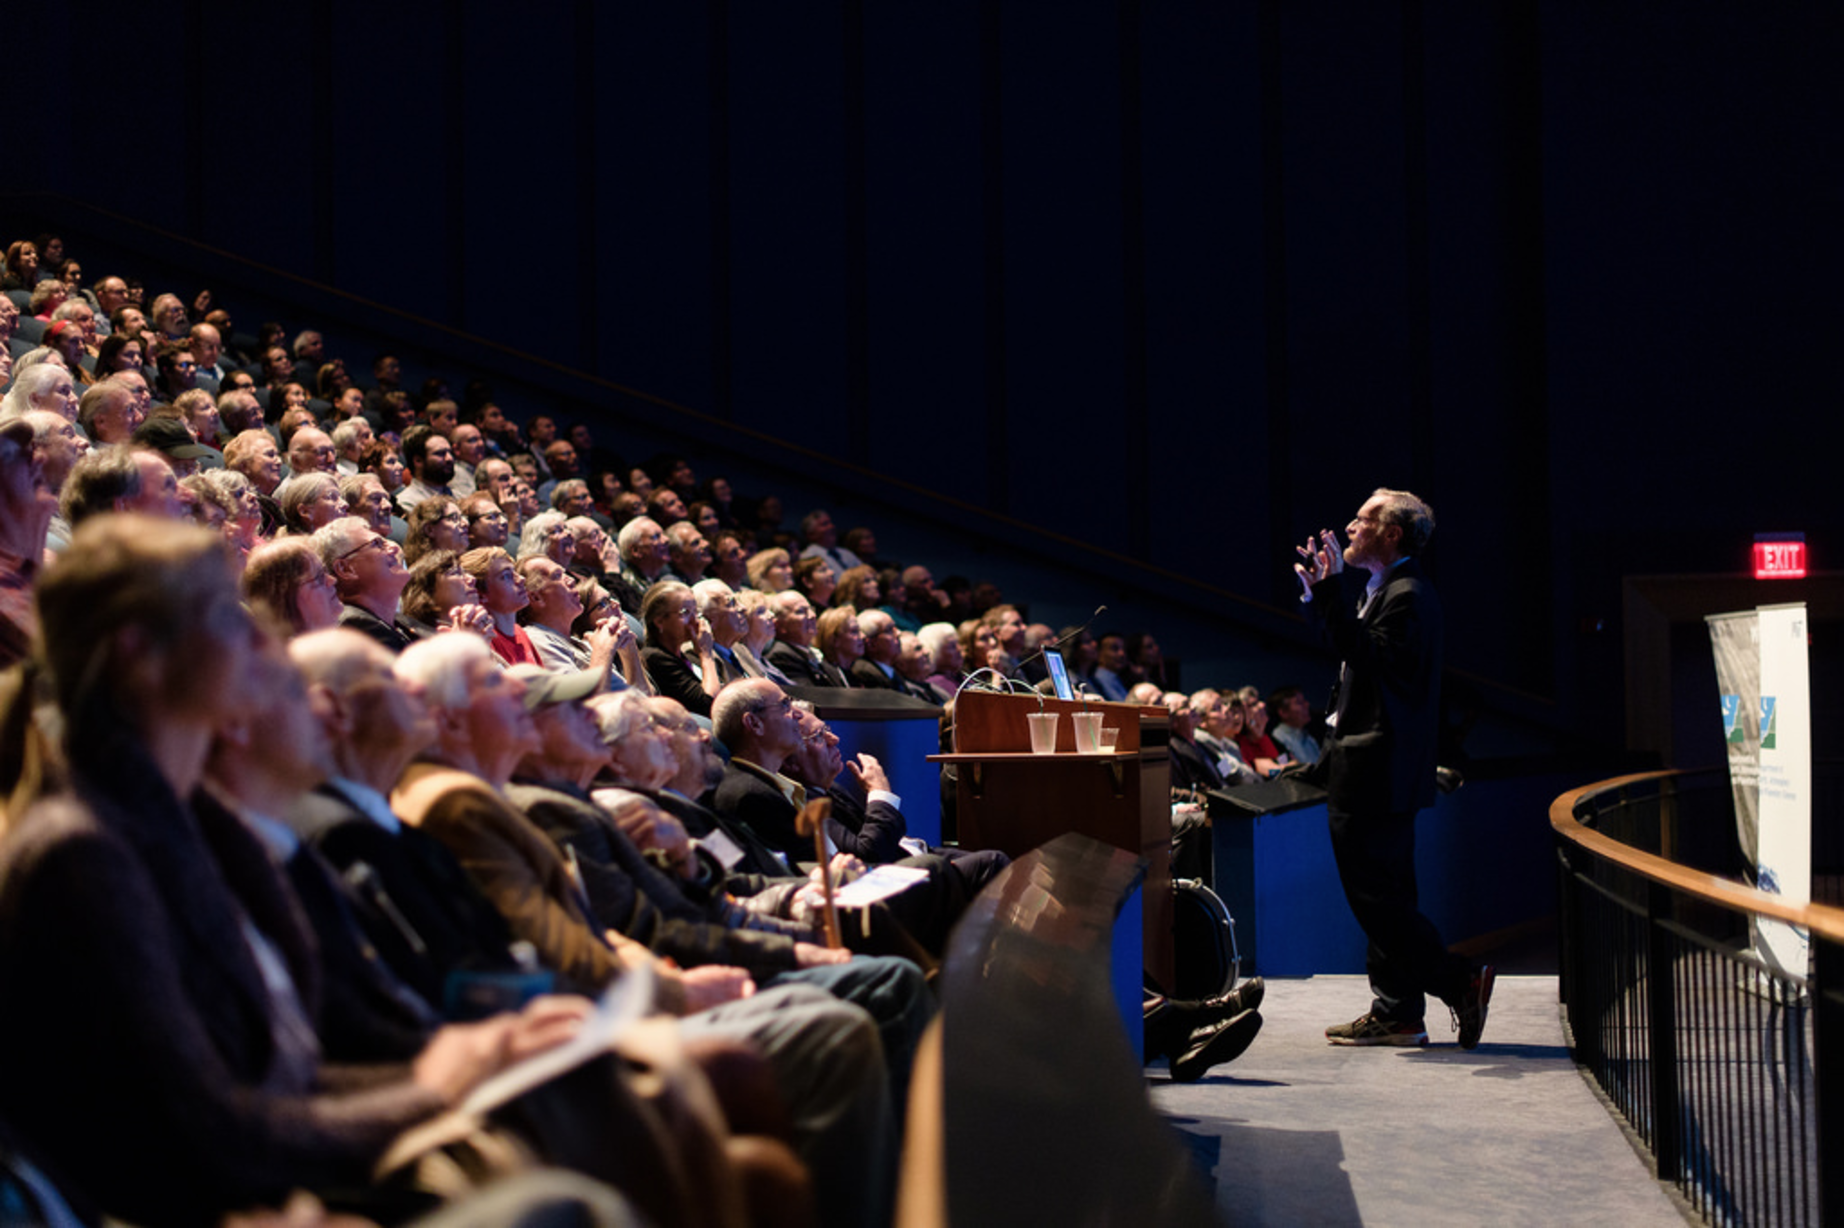 A capacity crowd at the Omni Theater of the New England Aquarium enjoying the 2016 John Carlson Lecture "Big Ice: Antarctica, Greenland and Boston" given by Prof. Richard Alley. (Photo: John Gillooly)